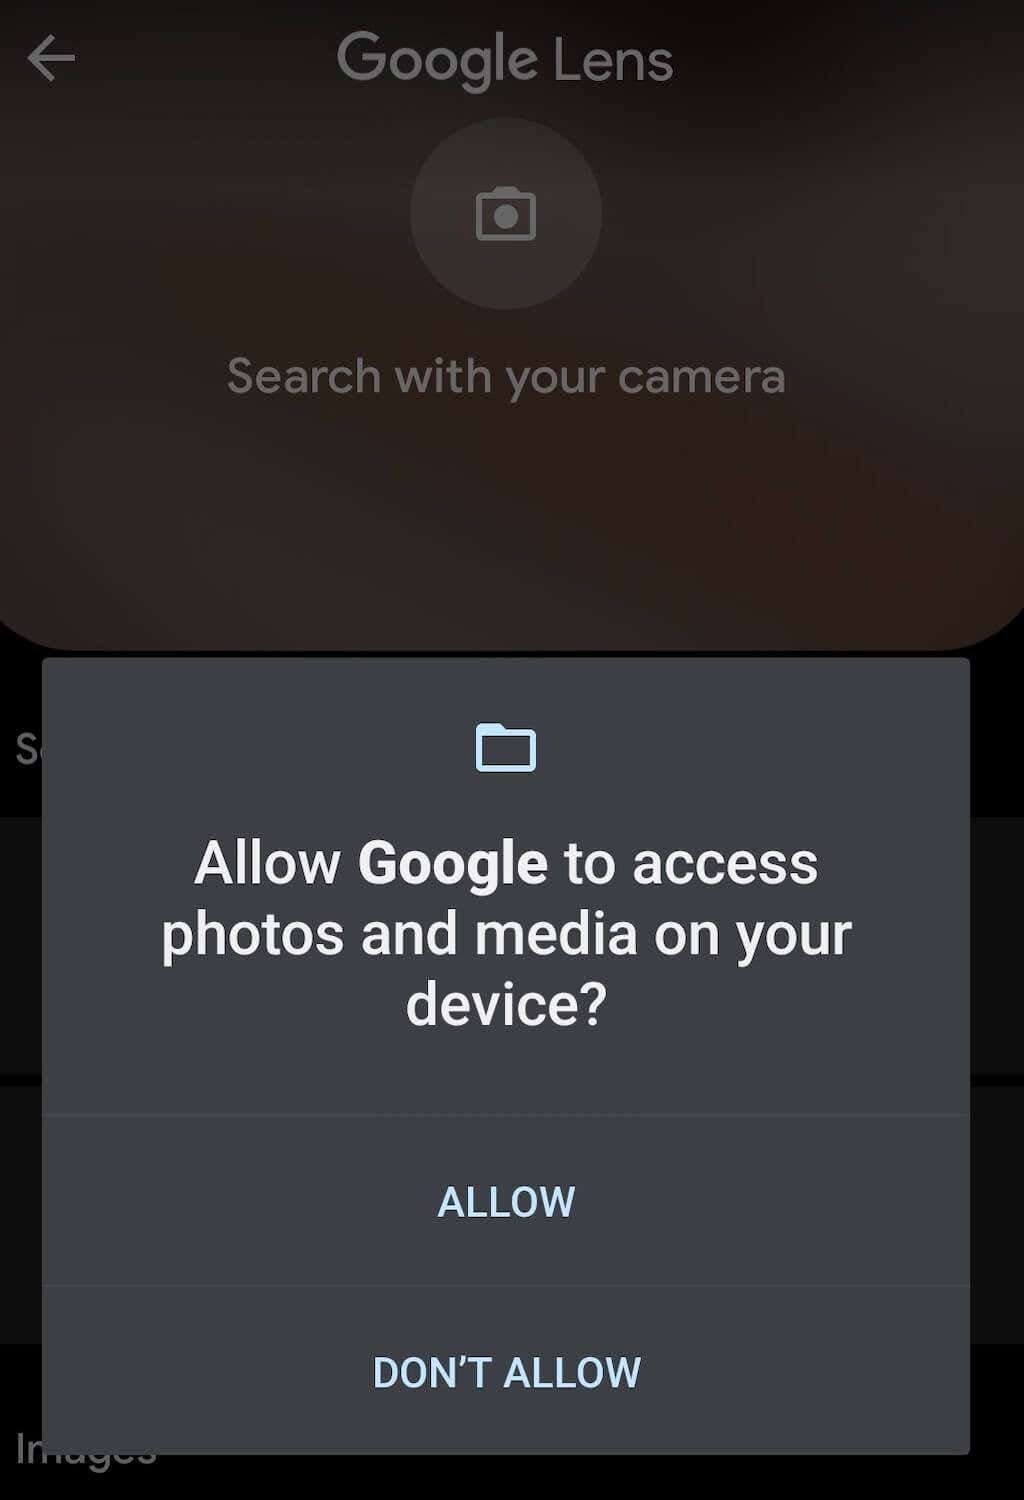 How do I enable Google Lens to search my photos?